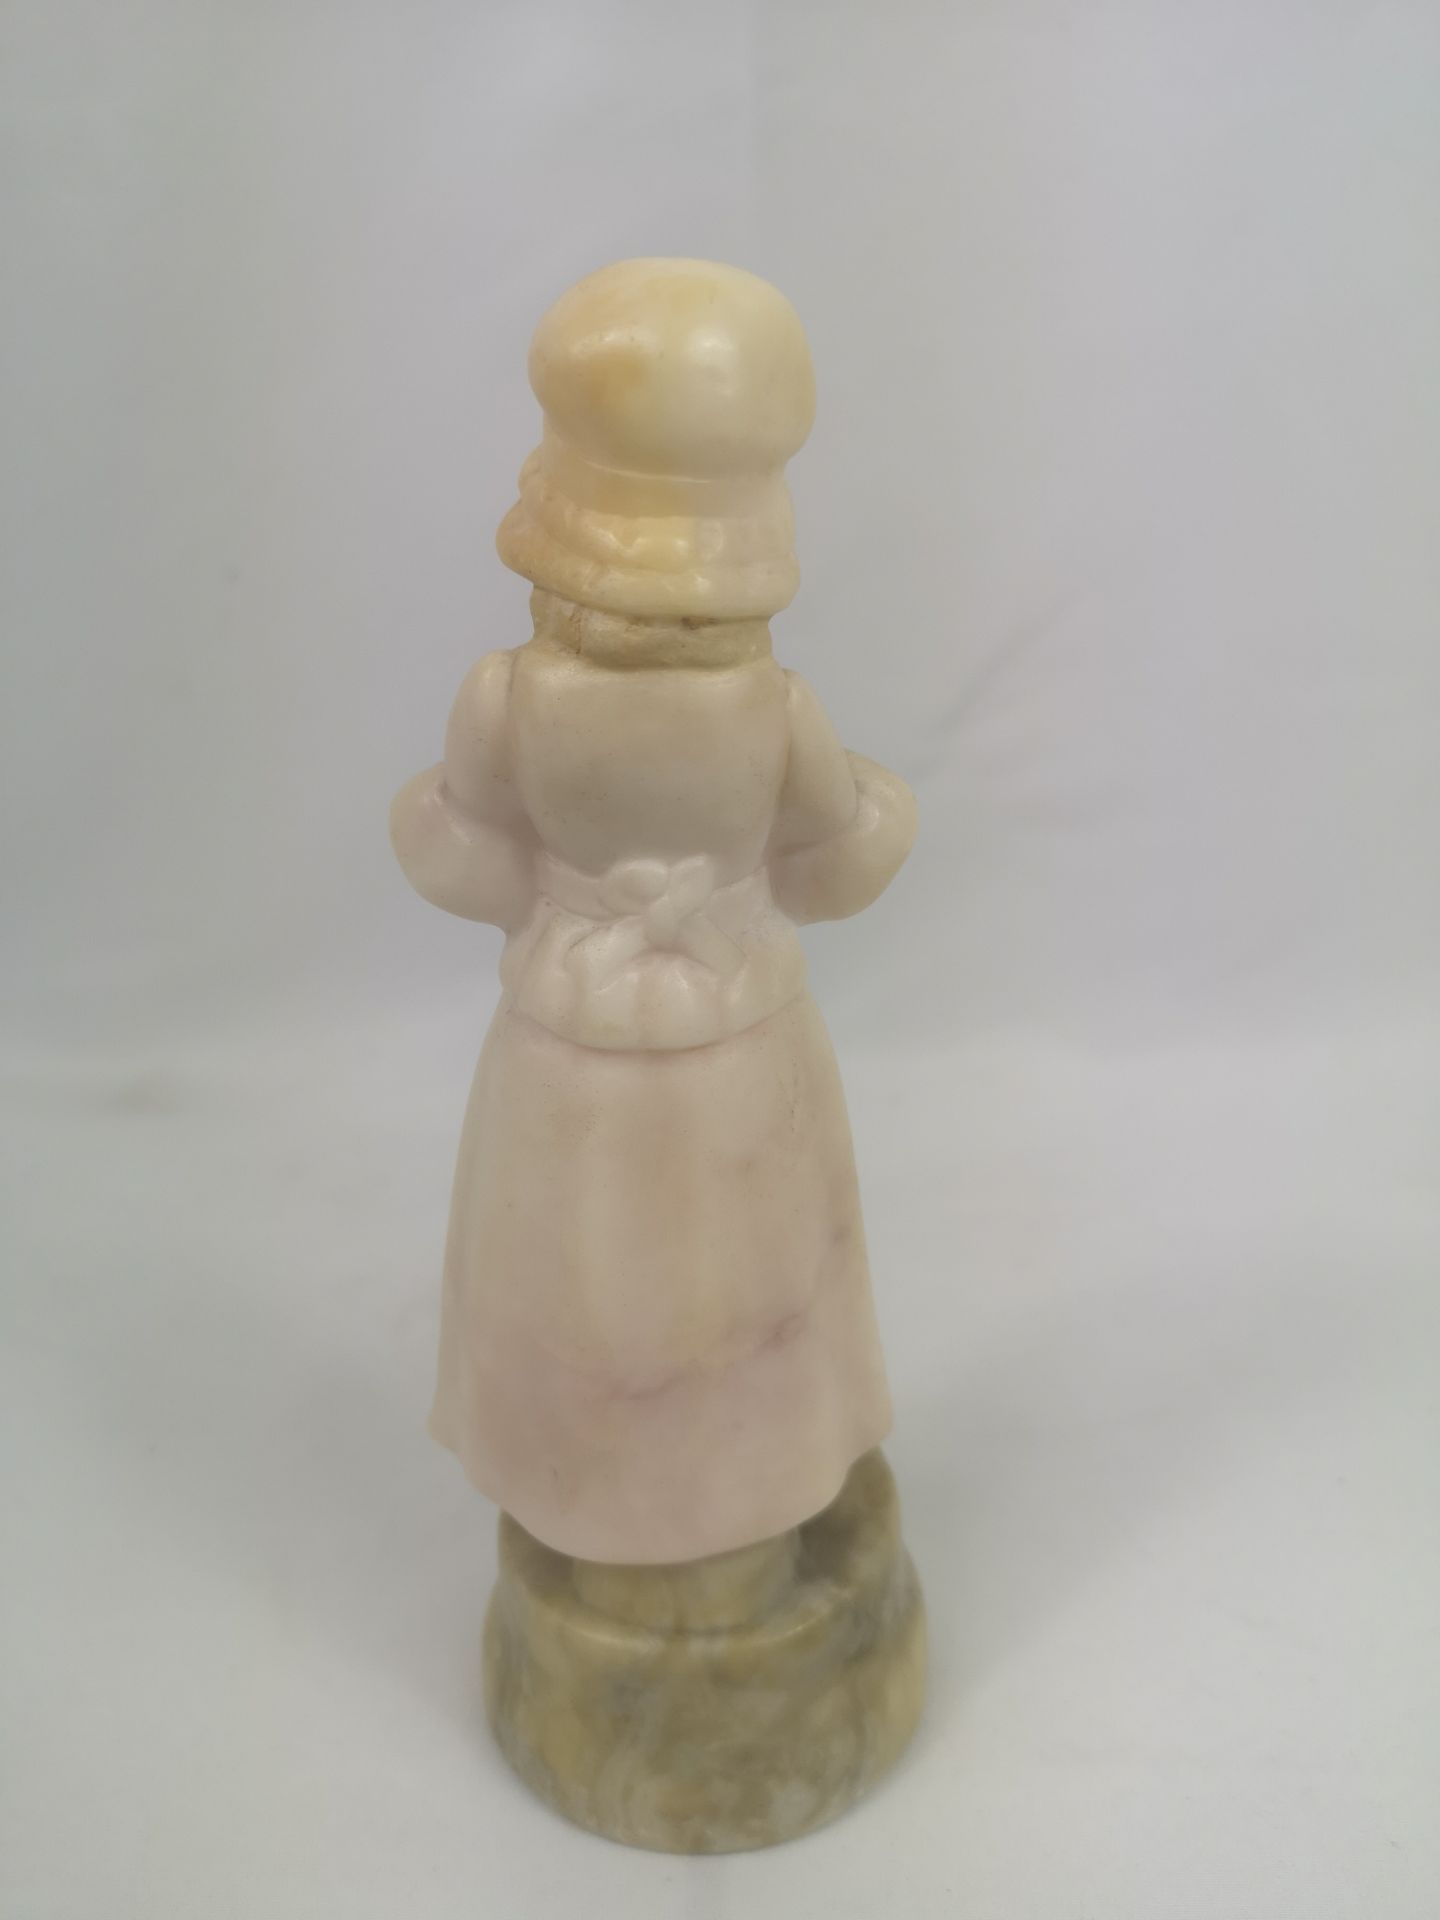 Art deco style Rosenthal figurine together with a Goldscheider figurine - Image 4 of 6